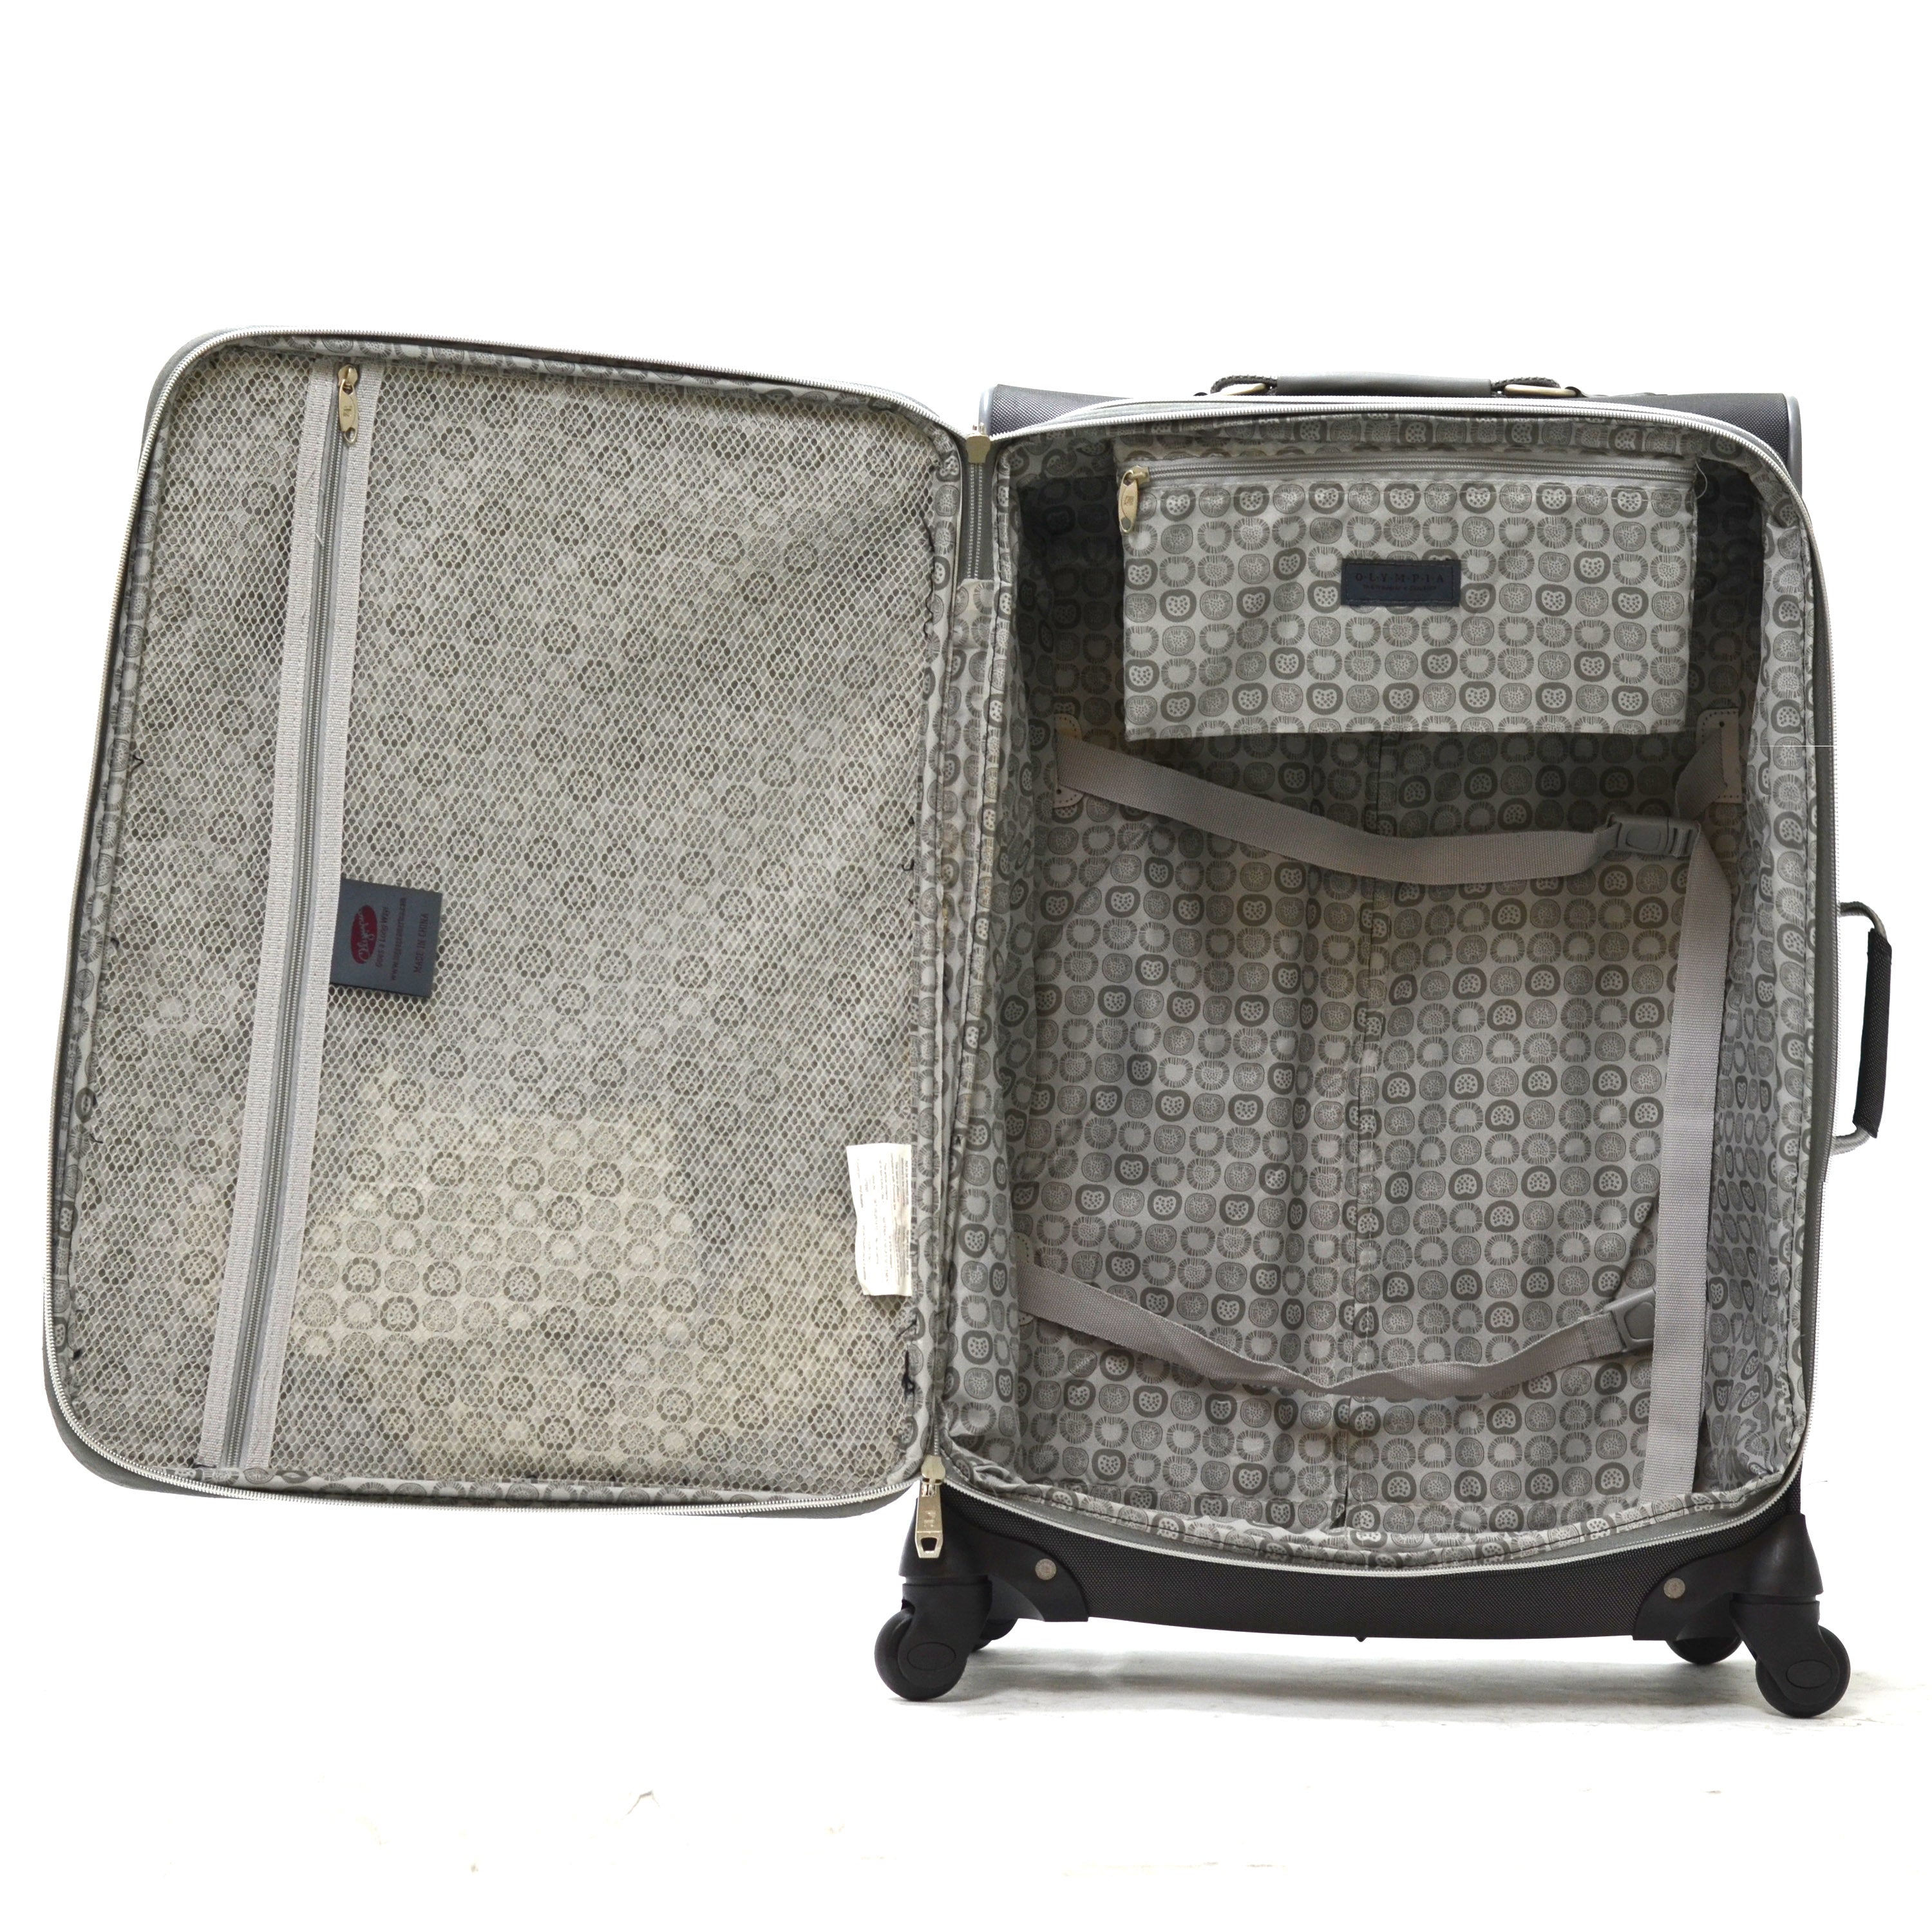 Skyhawk 22" Carry-On, Gender Neutral, Lightweight Luggage & Travel Bag with Classic Design